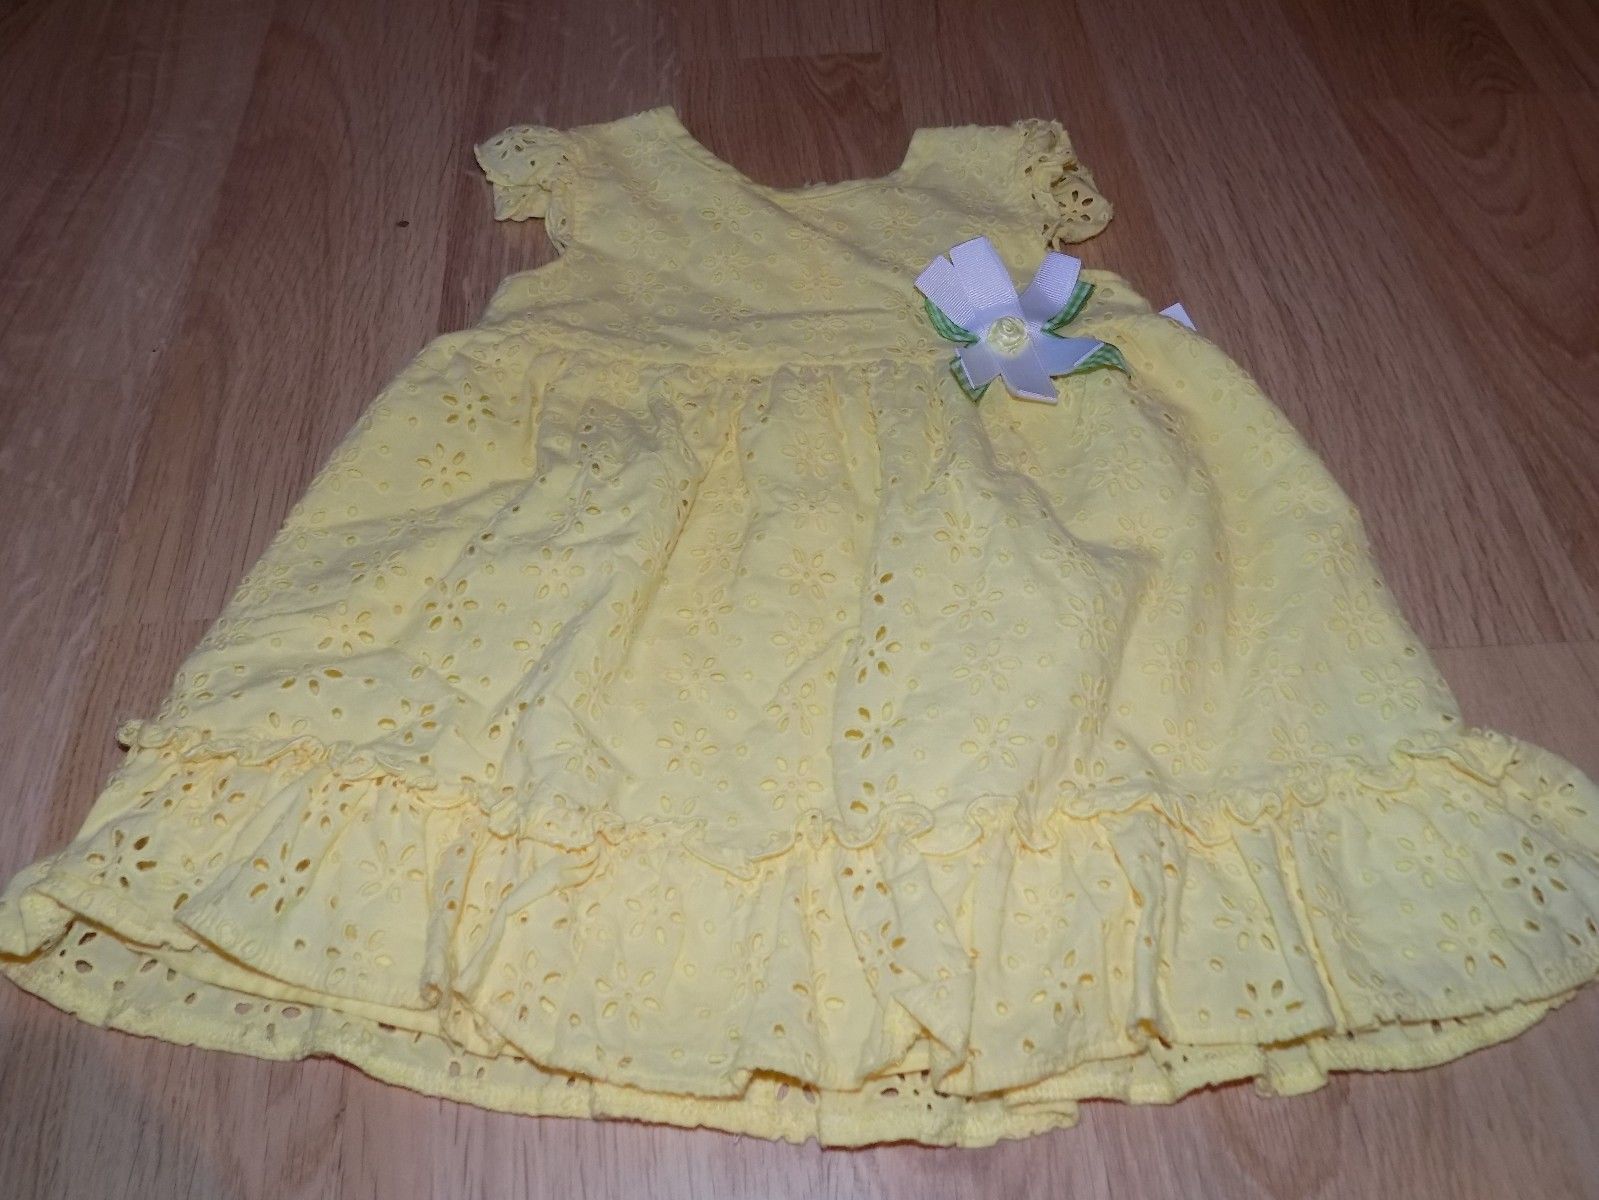 Infant Size 18 Months Starting Out Solid Yellow Eyelet Lace Easter Dress EUC - $15.00